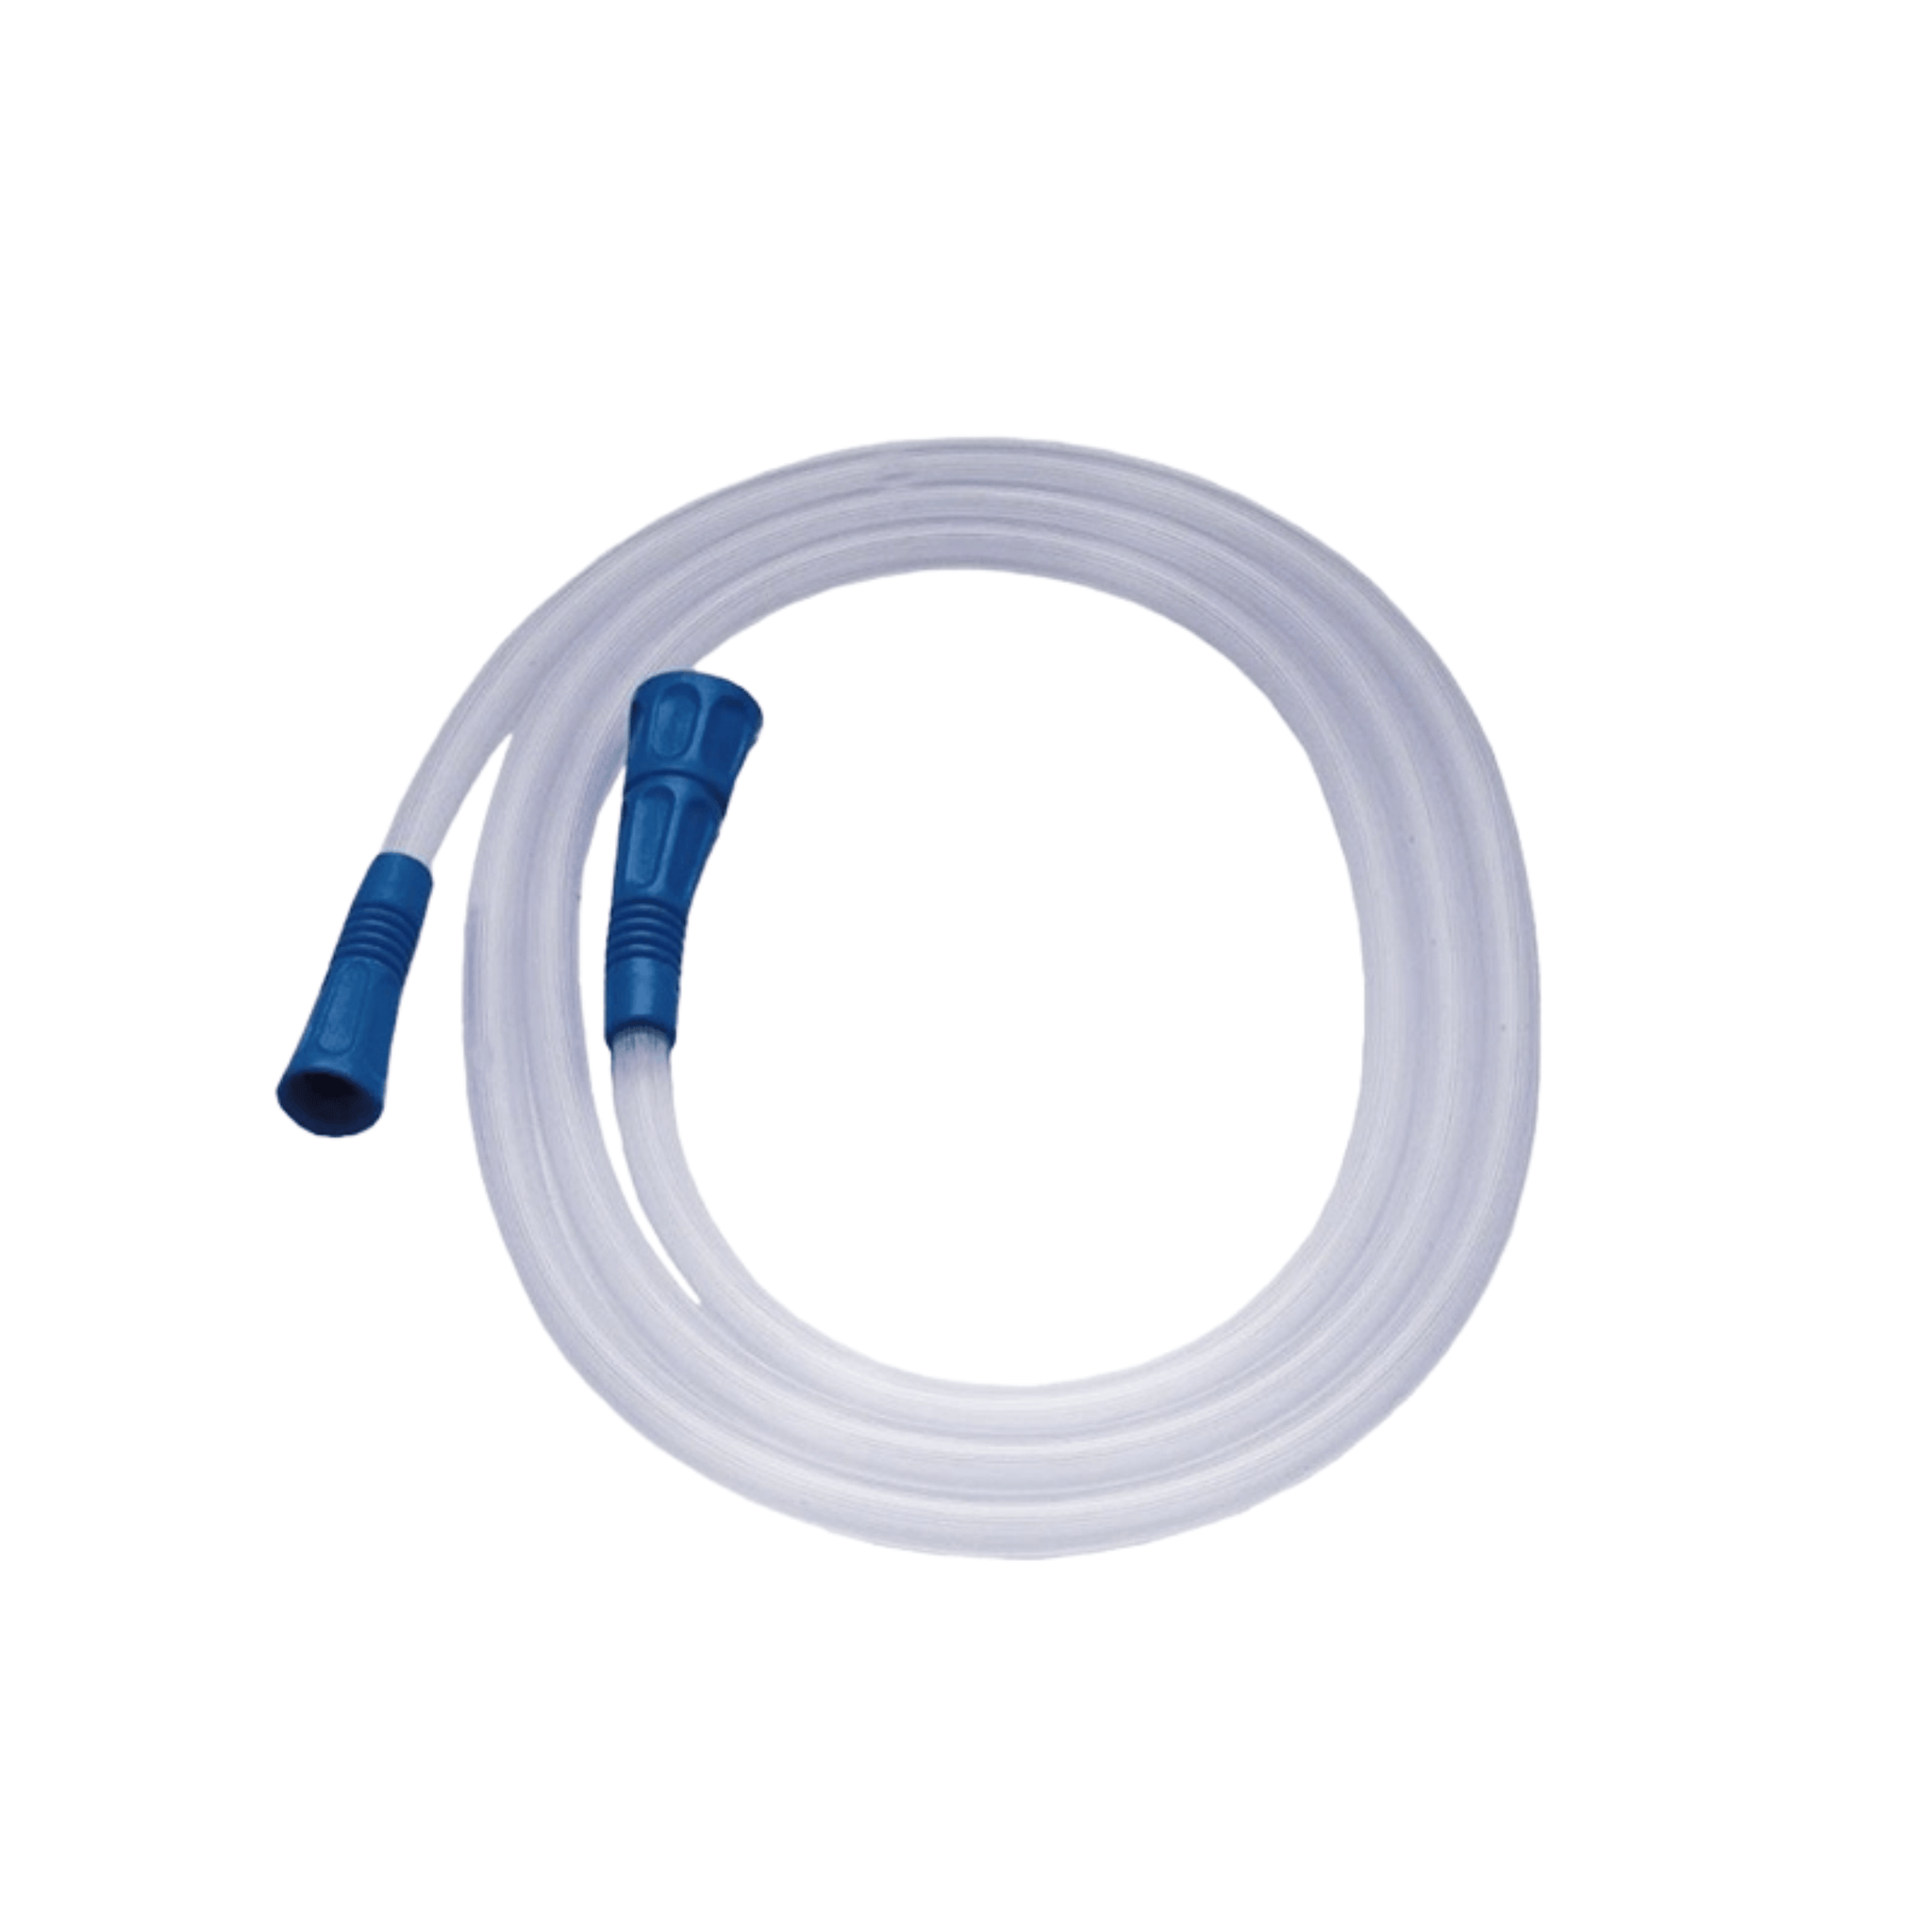 Suction Pump Tube with Connector- 3/16' , 3.6 m